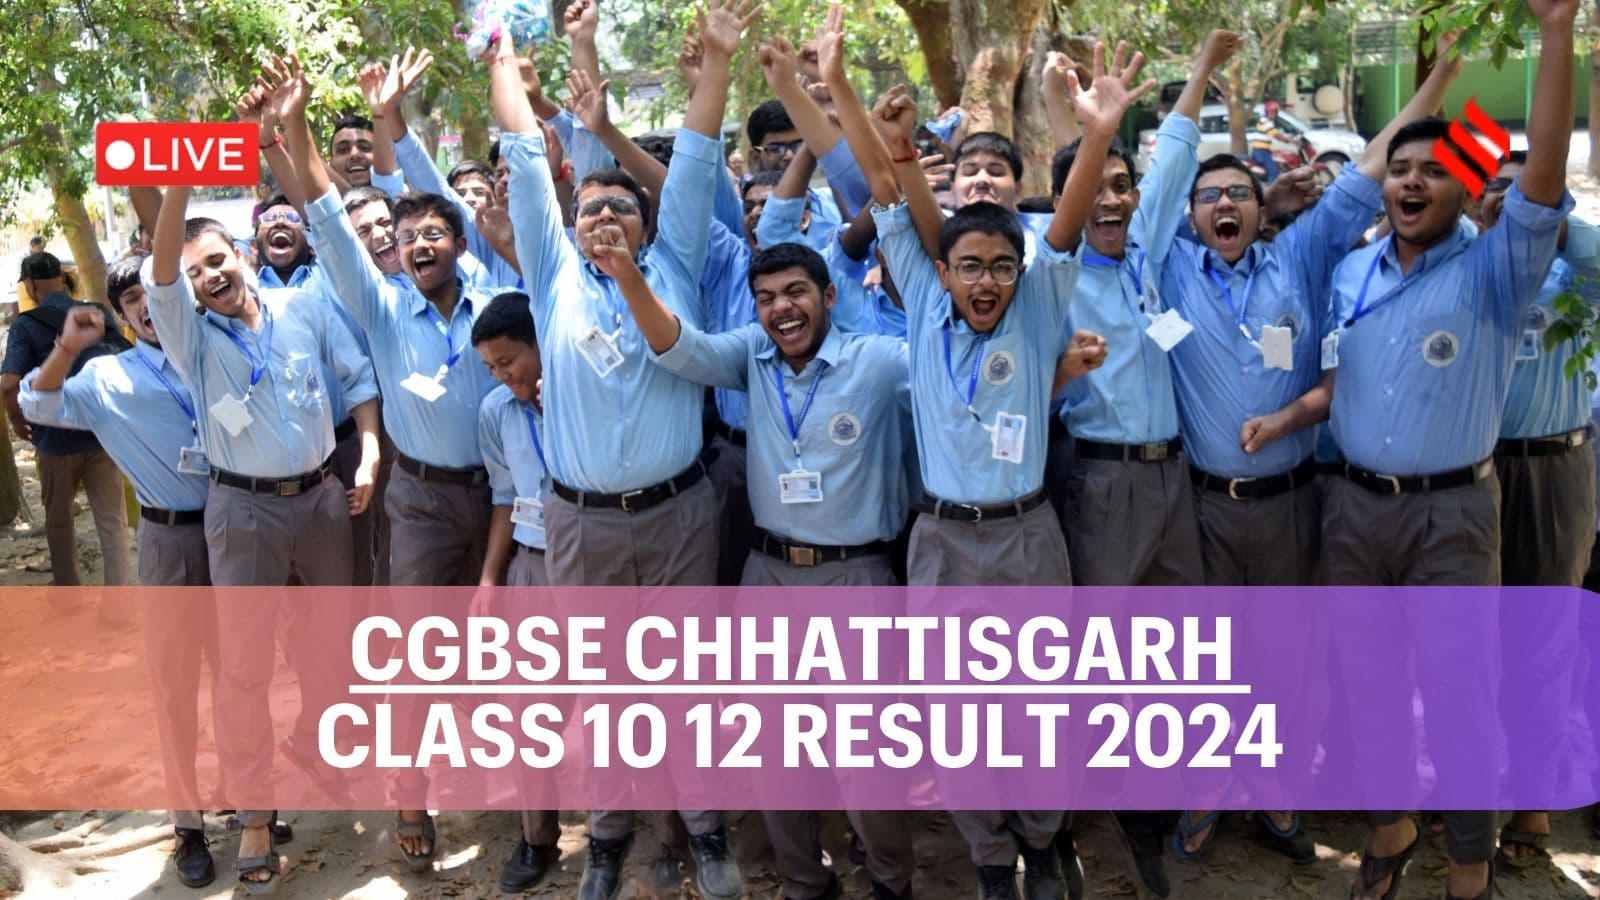 Chhattisgarh Board Class 10 12 Result 2024: Students who appeared for the Class 10, 12 exams can check the results at the official website – cgbse.nic.in, results.cg.nic.in.